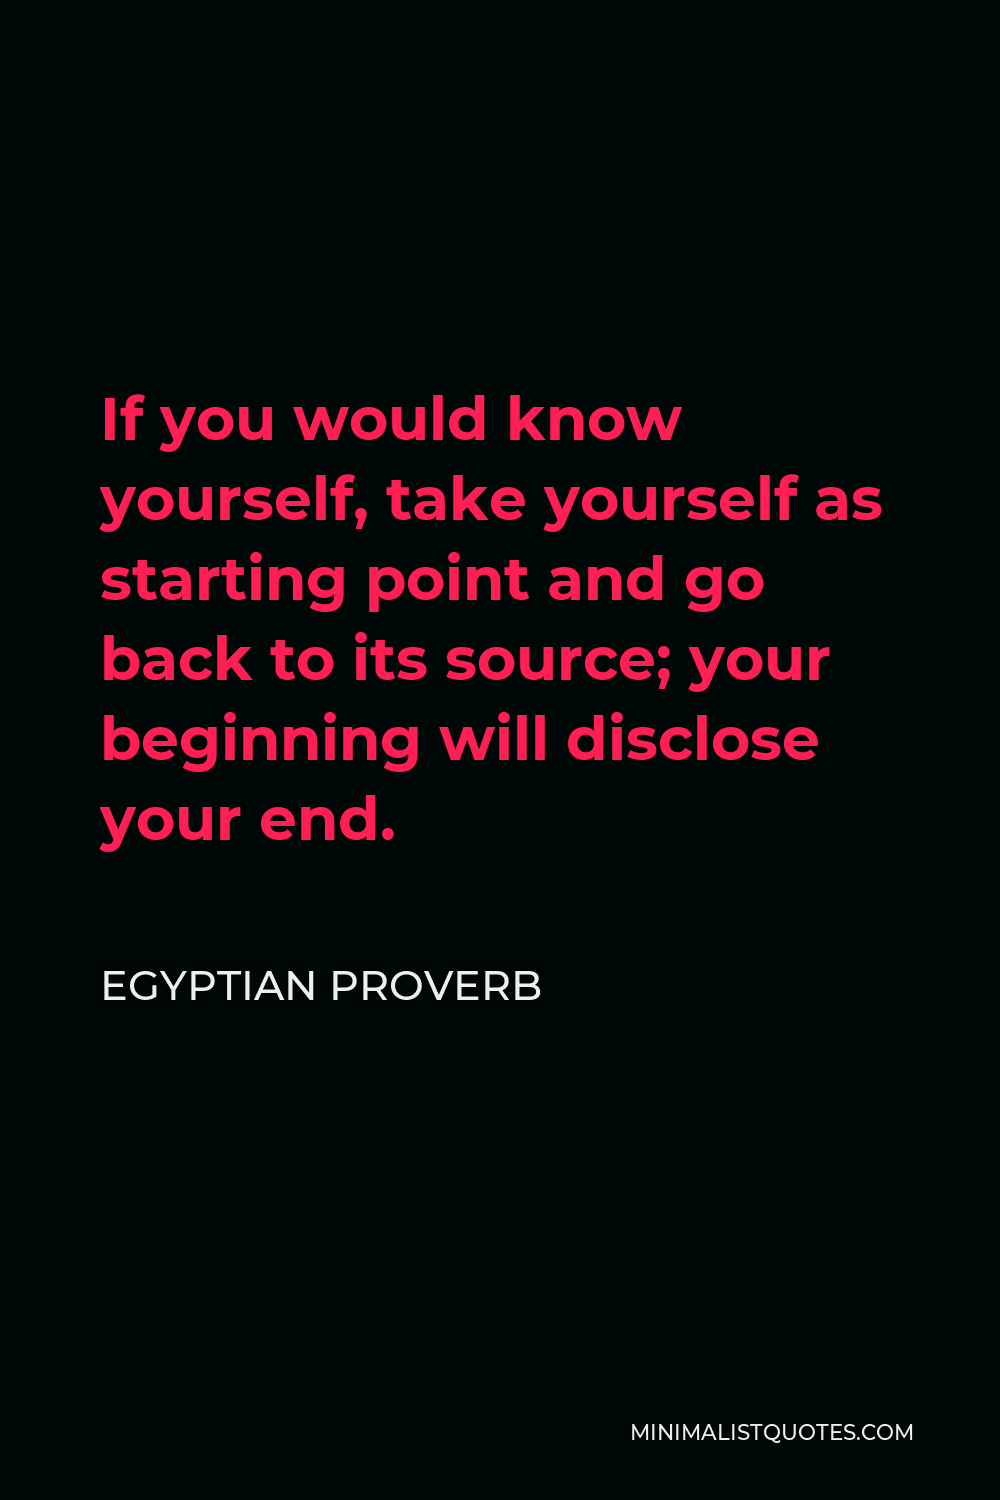 Egyptian Proverb Quote - If you would know yourself, take yourself as starting point and go back to its source; your beginning will disclose your end.